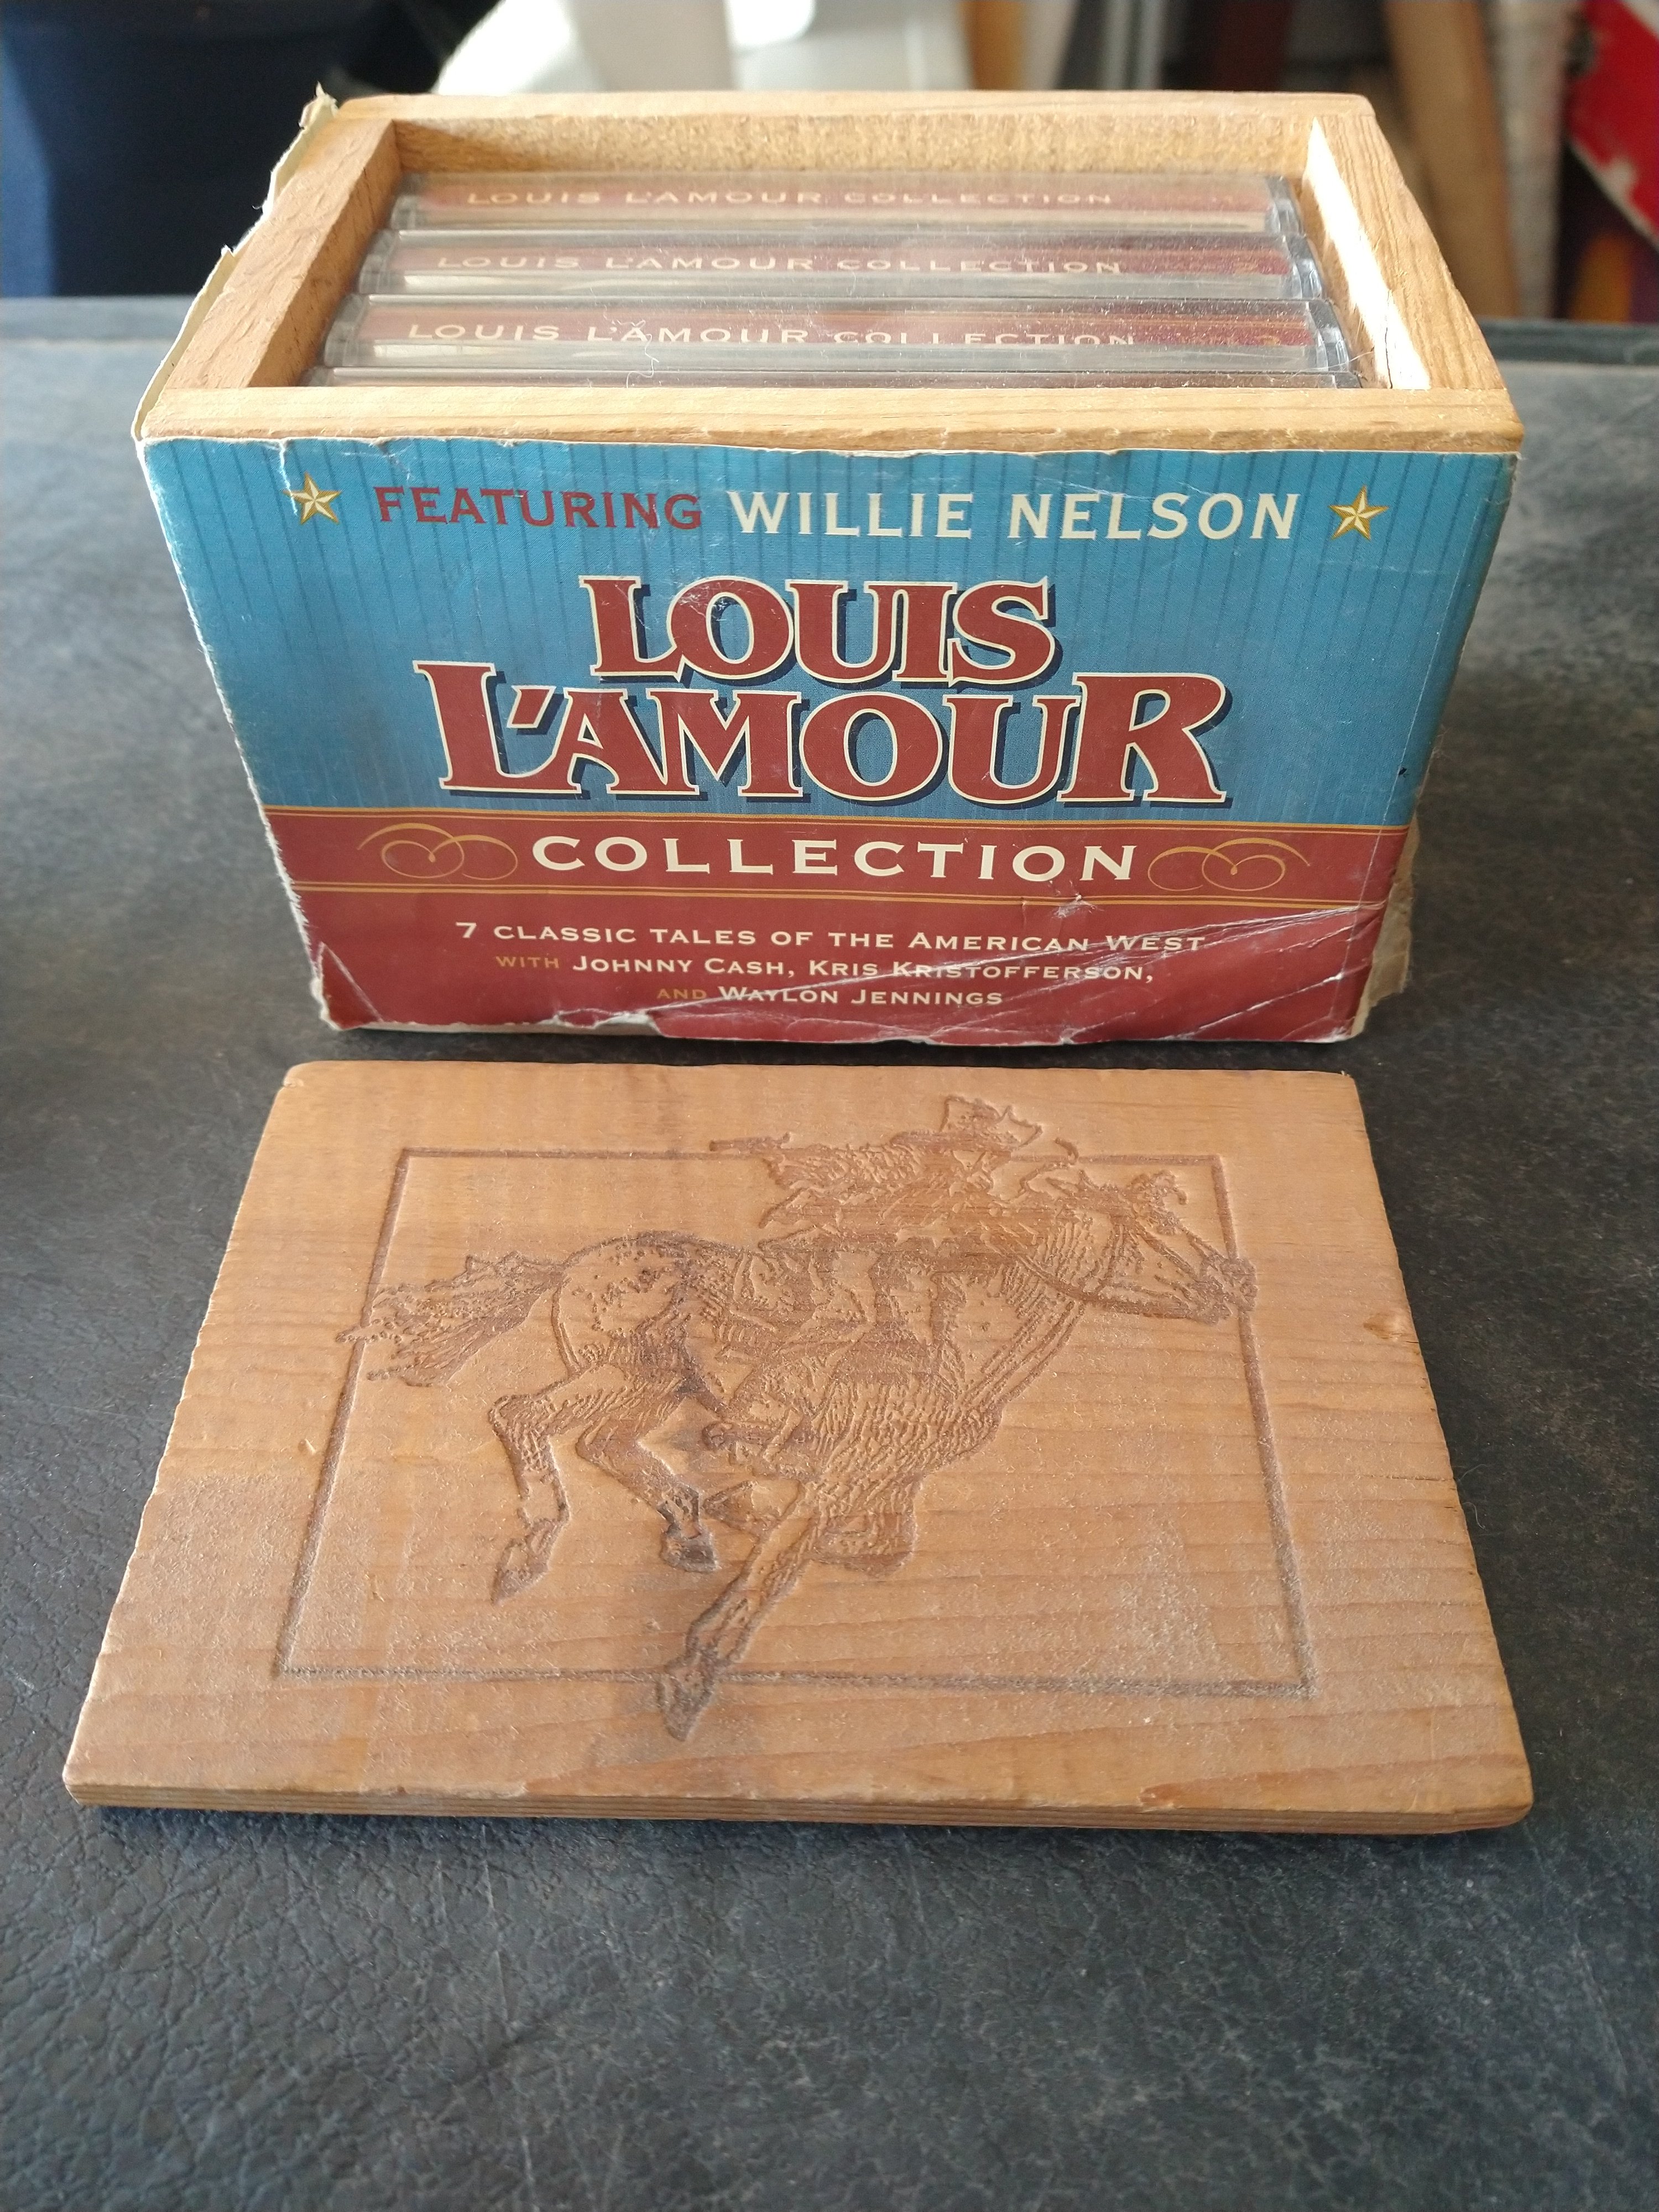 louis l'amour collection featuring willie nelson